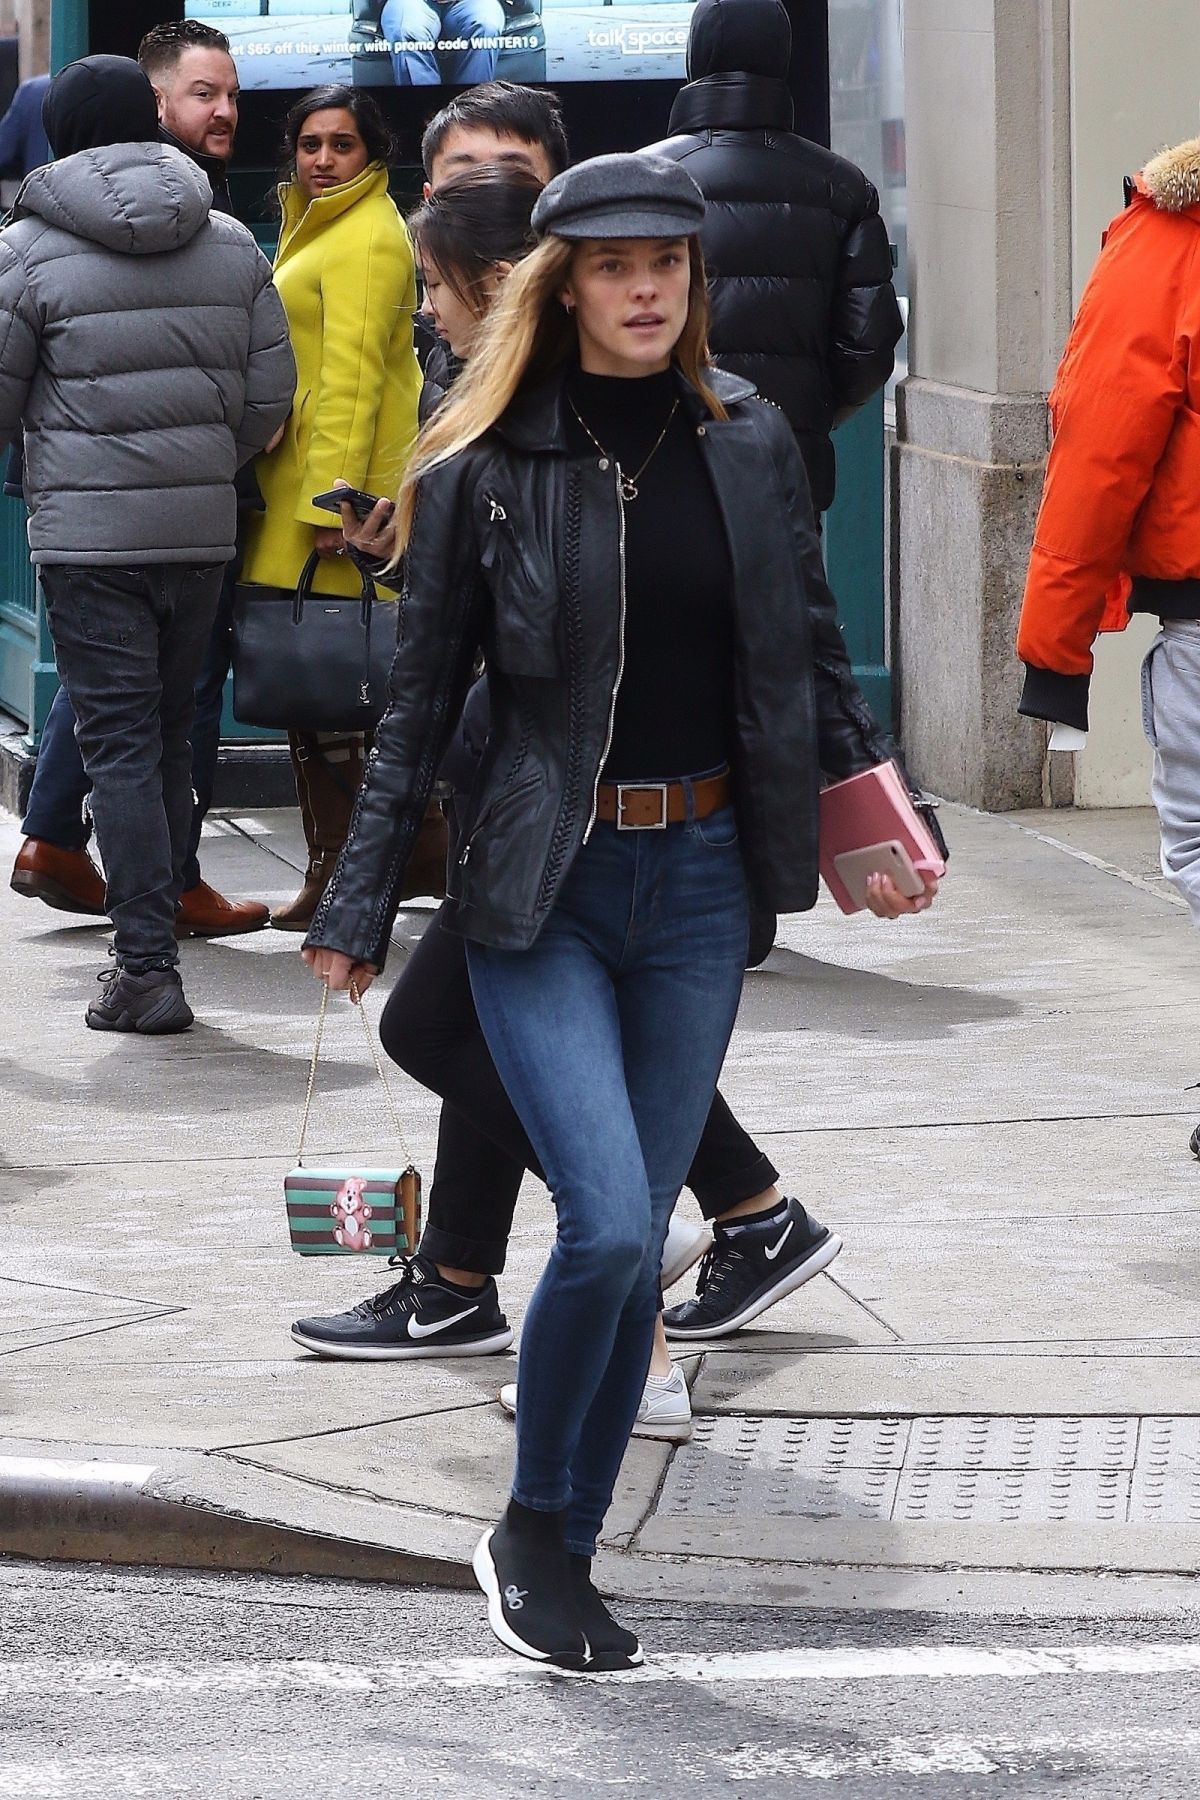 nina-agdal-out-and-about-in-new-york-03-22-2019-celebrityparadise-hollywood-celebrities-babes-more-7.jpg